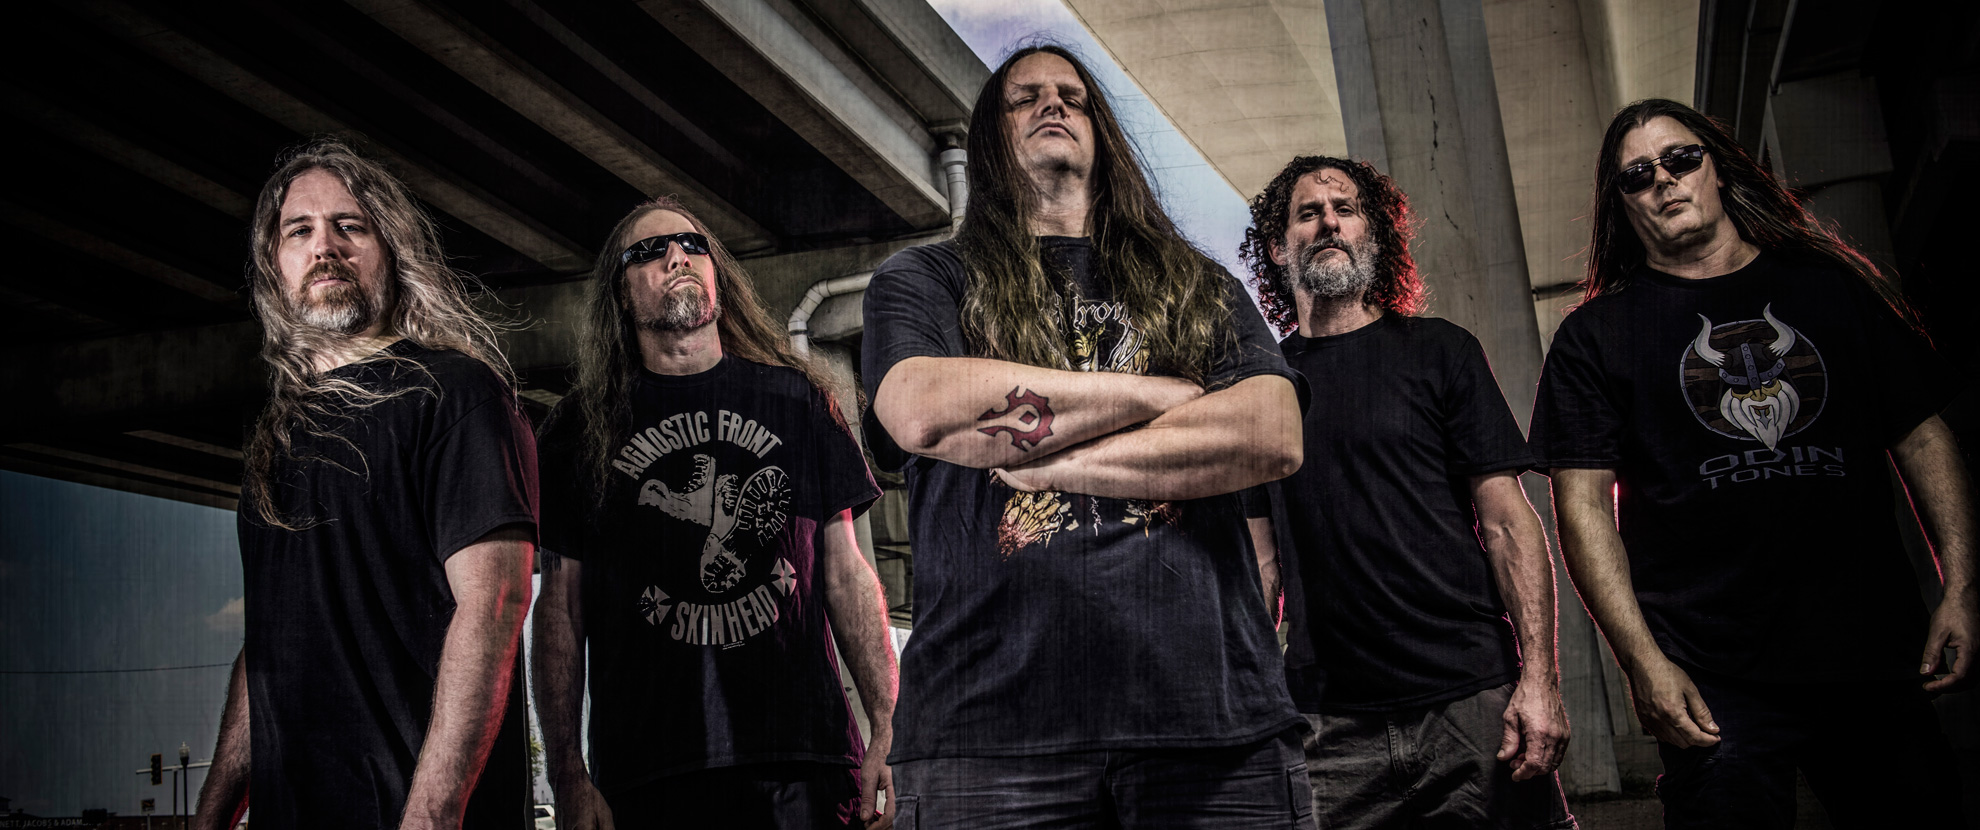 Cannibal Corpse issue statement on guitarist Pat O’Brien